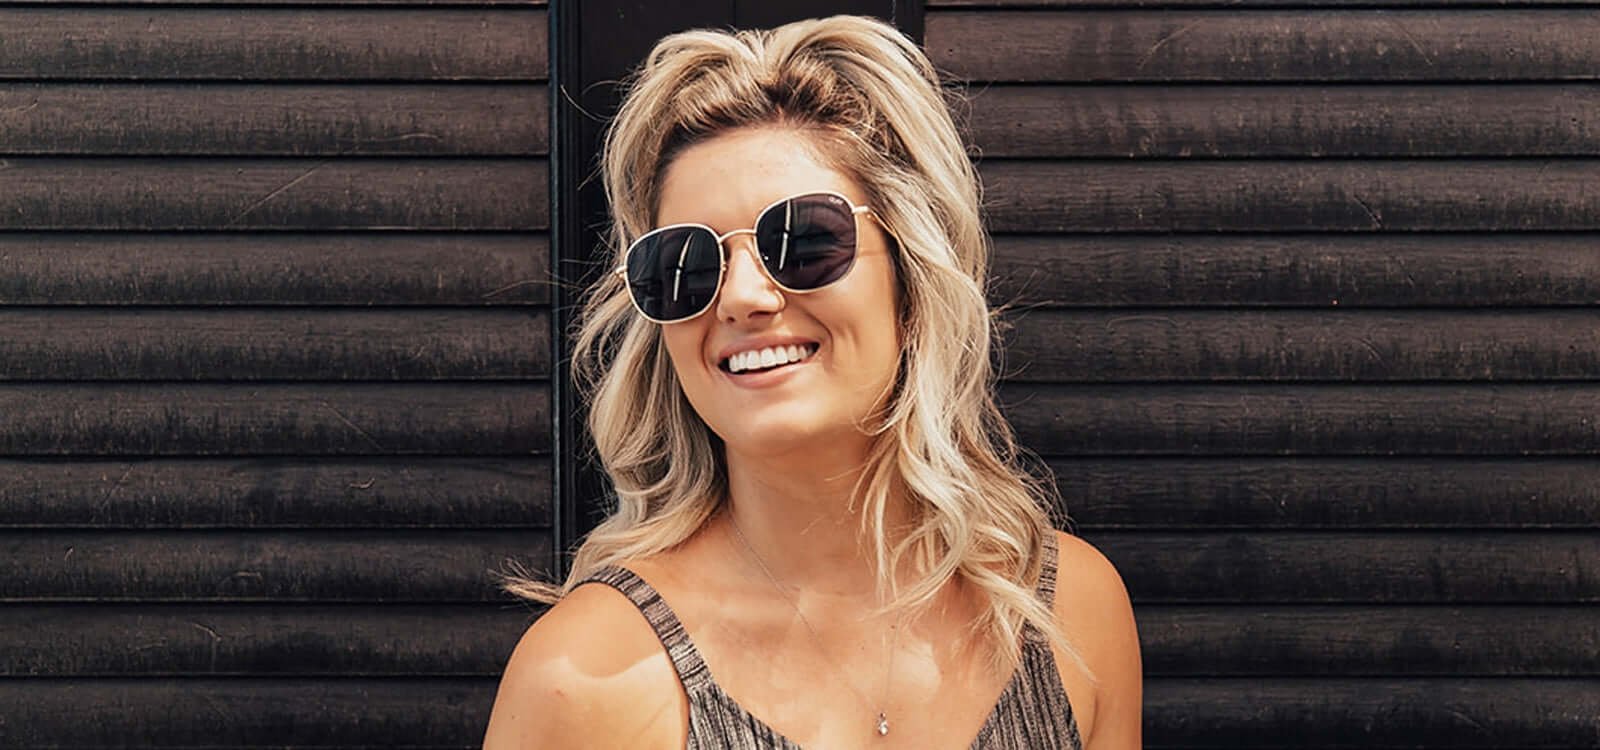 Blonde shorter hair with TYME curls and sunglasses